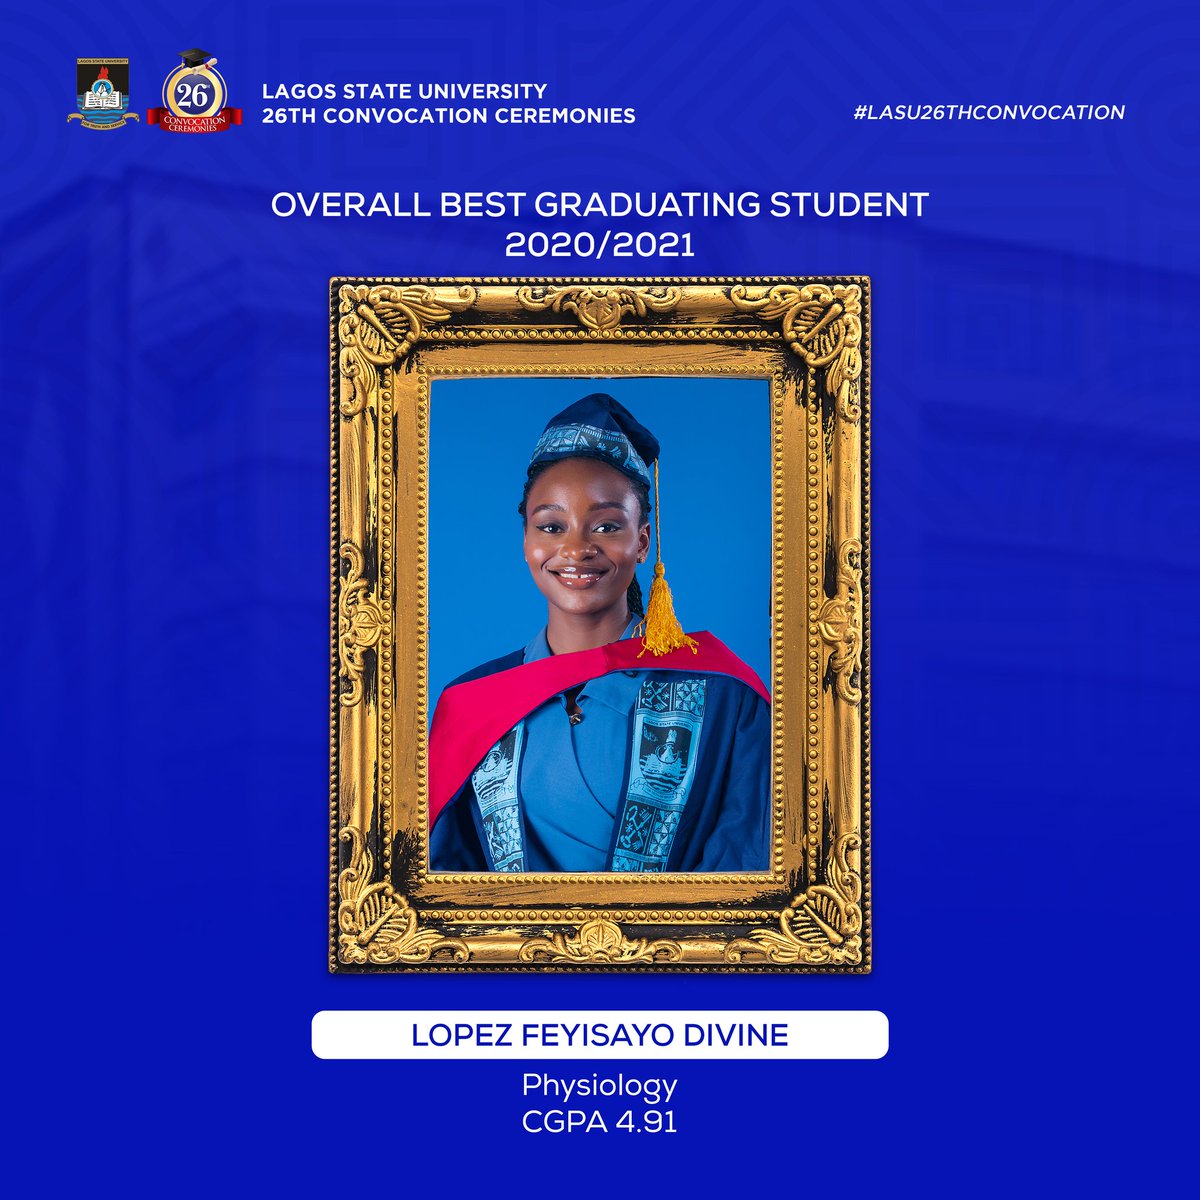 Congratulations to @divine_fey our Best Graduating Student for the 2020/2021 Academic Session with a CGPA of 4.91 in Physiology. 
We celebrate you.

#LASU26thConvocation